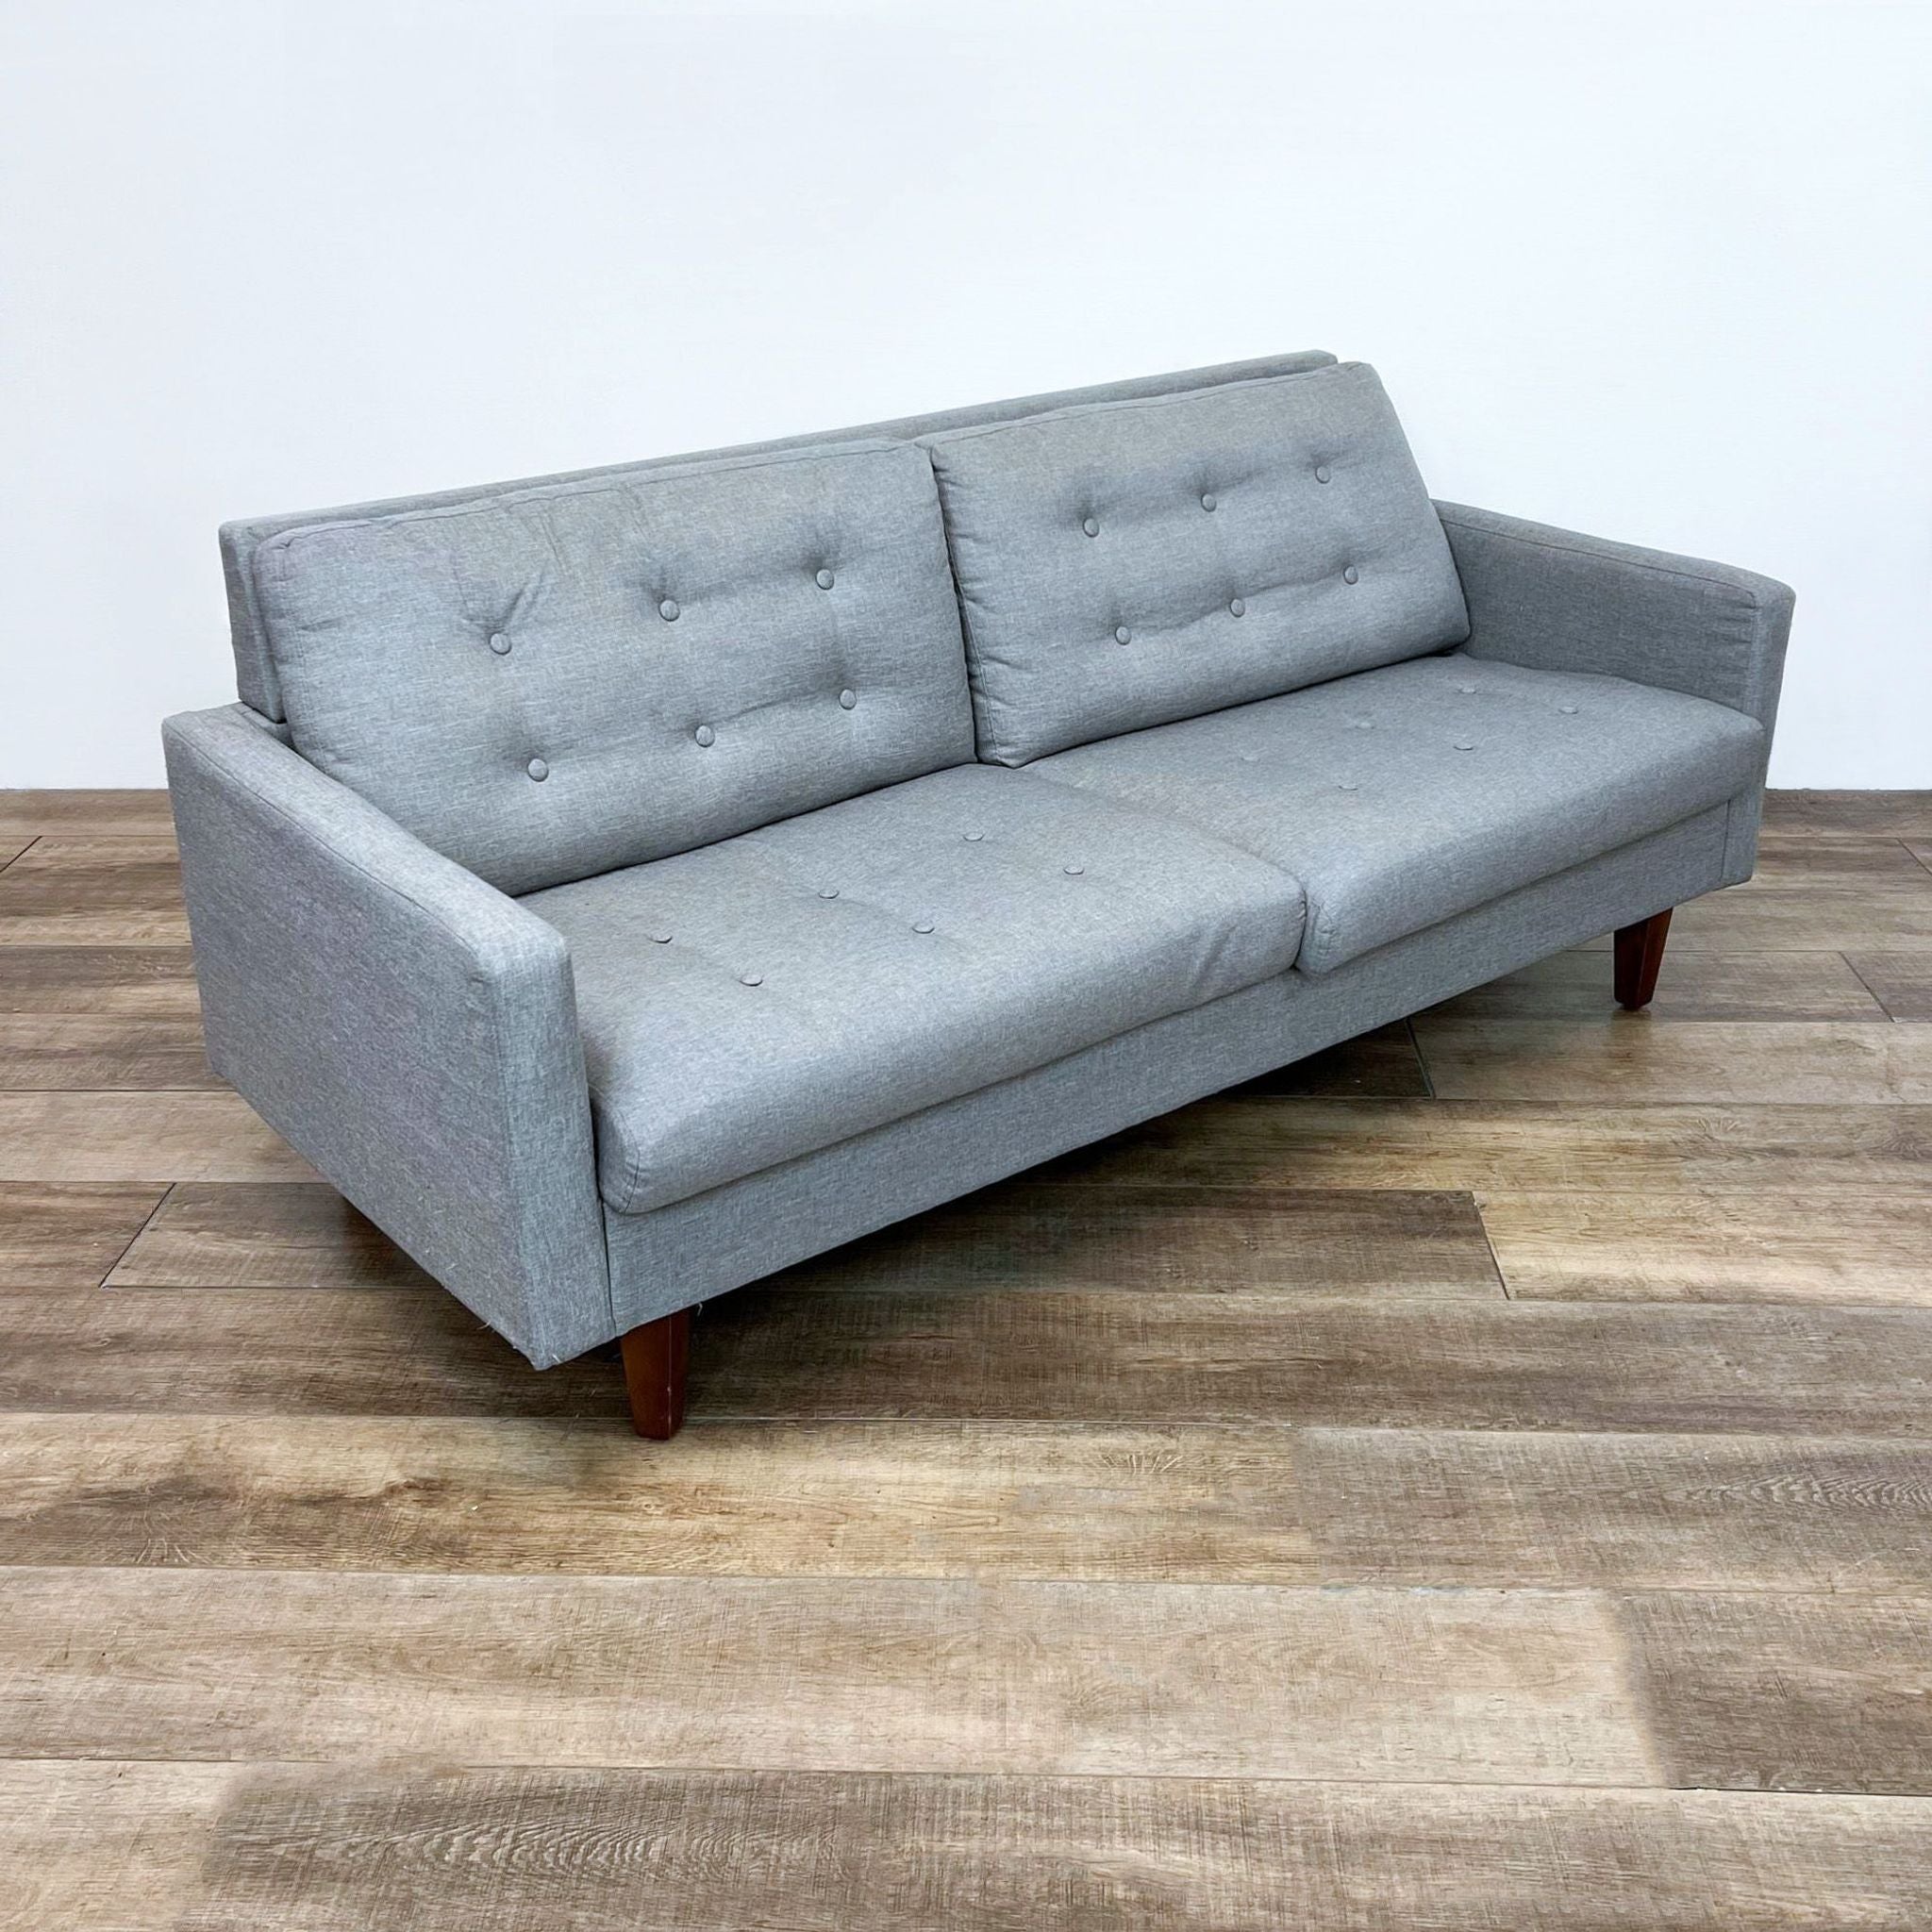 Gray upholstered three-seater Aeon Furniture sofa with button details and slanted wooden legs, placed on a wooden floor.